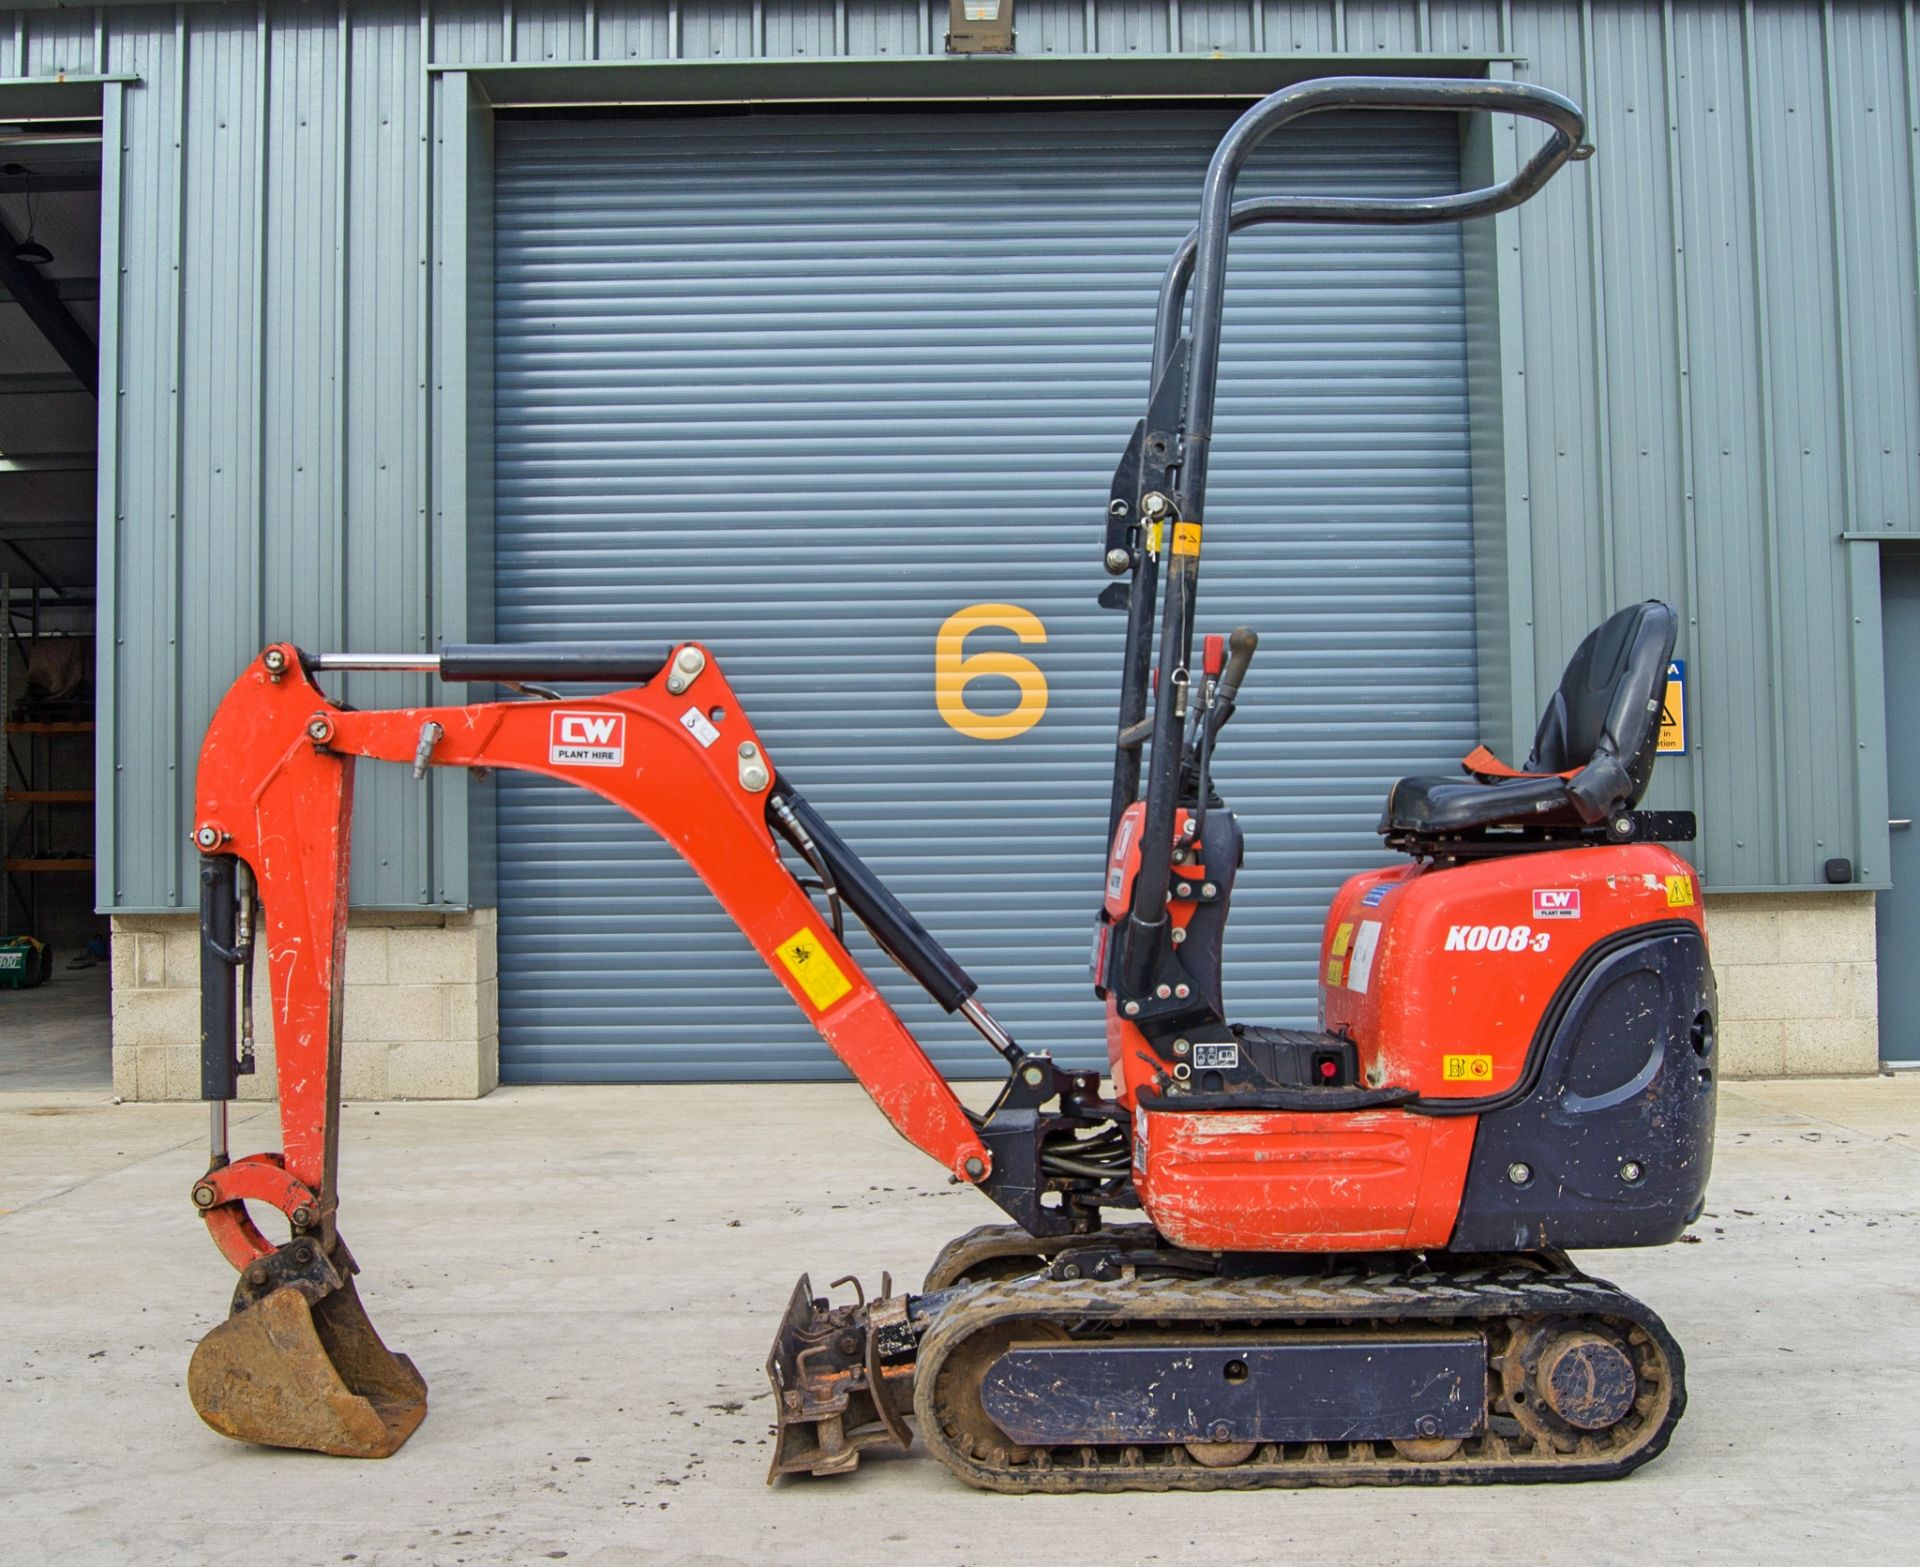 Kubota K008-3 0.8 tonne rubber tracked micro excavator Year: 2018 S/N: 31225 Recorded Hours: 966 - Image 8 of 26